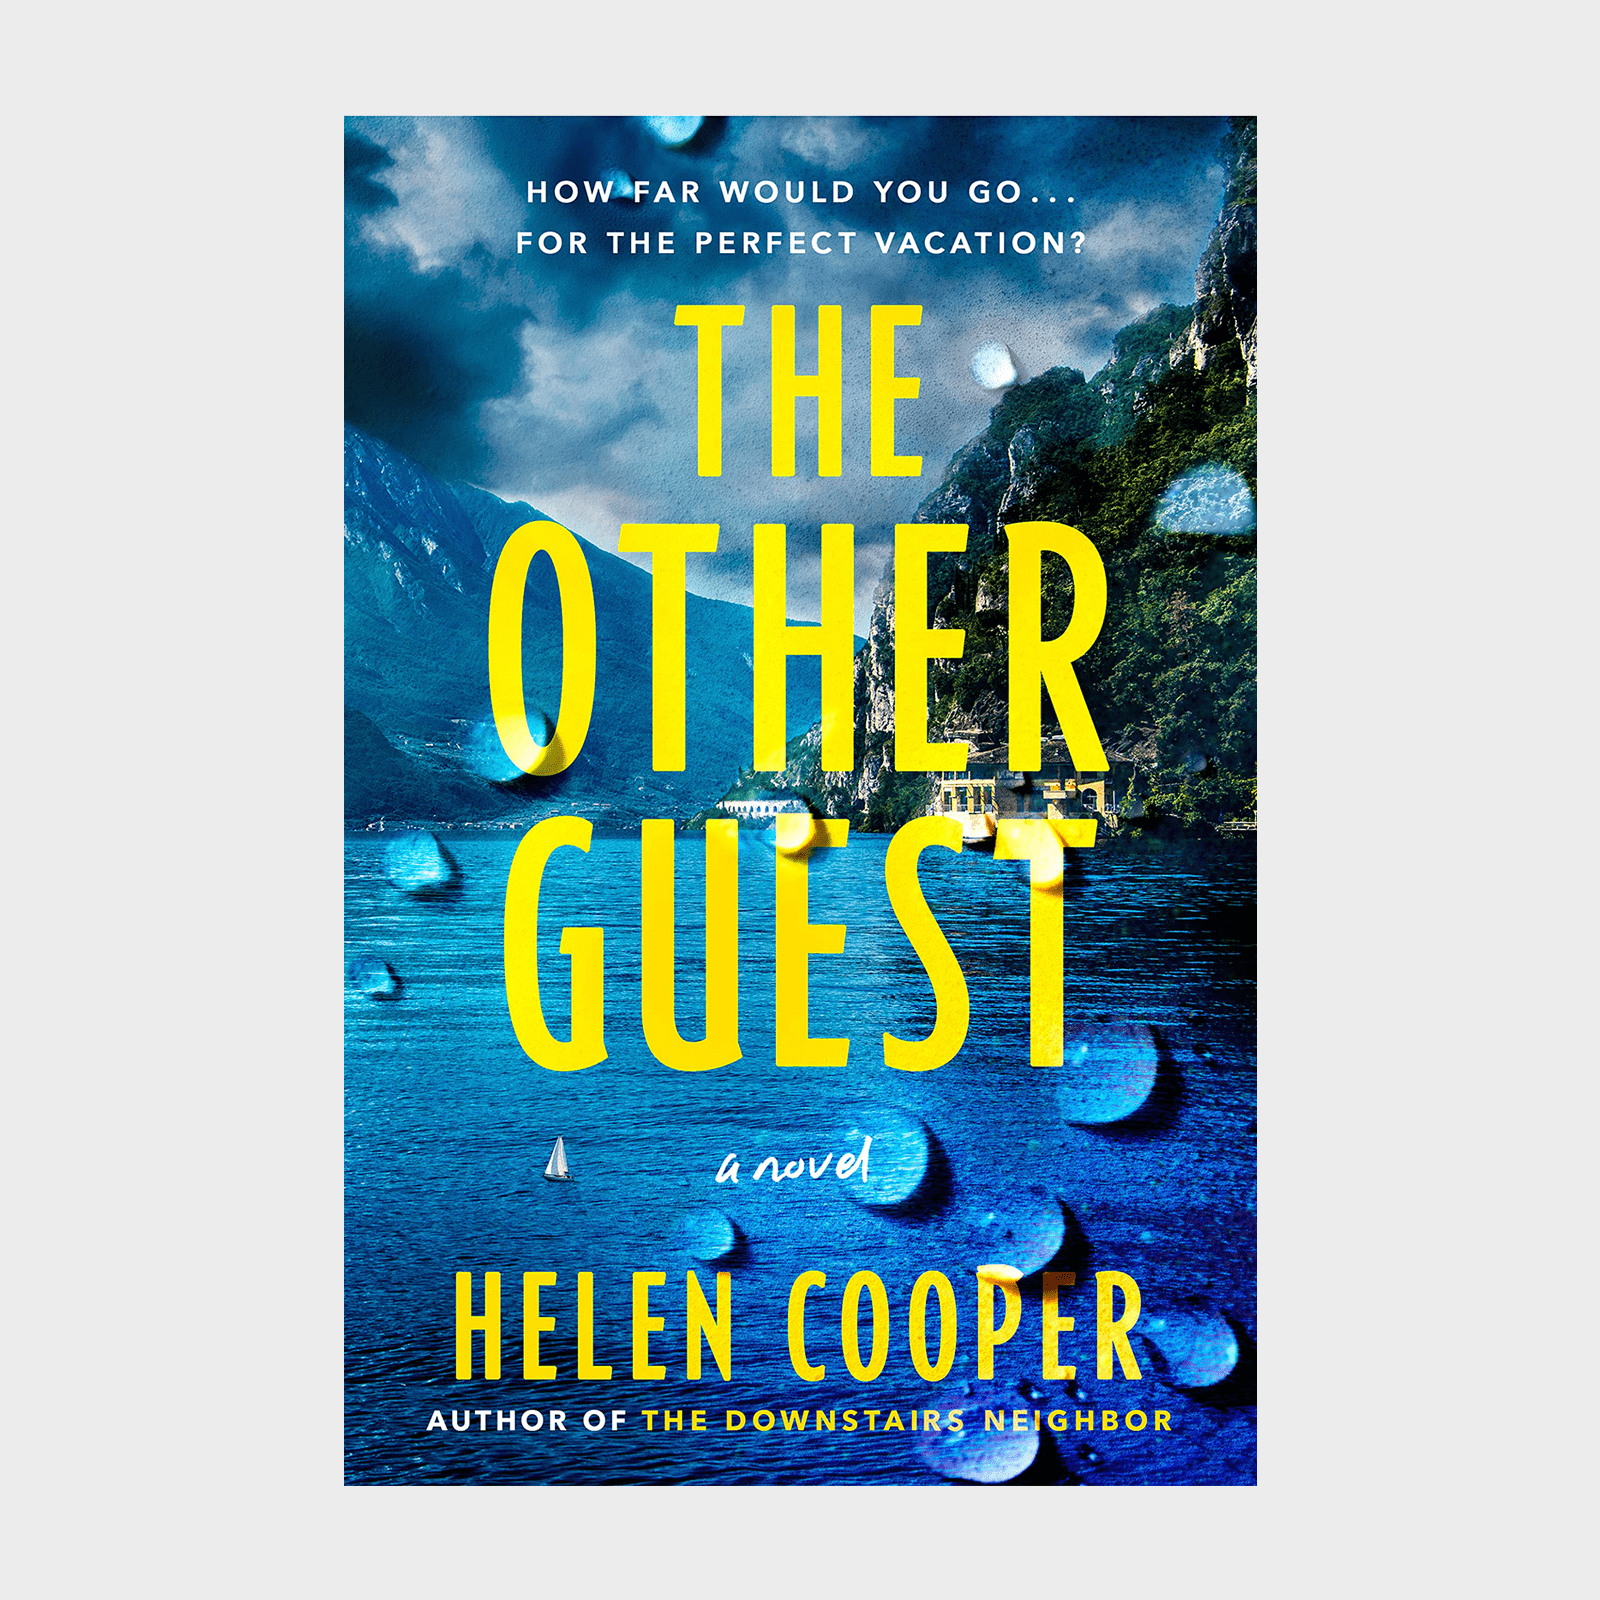 <p><strong>Release date: </strong>July 26, 2022</p> <p>Helen Cooper's <a href="https://www.amazon.com/Other-Guest-Helen-Cooper/dp/0593422597" rel="noopener noreferrer">latest page-turner</a> slams together two unrelated women's lives in the aftermath of a tragedy at an Italian resort. Leah knows deep down that her niece's death was not an accidental drowning. And far away in England, a woman named Joanna knows deep down that her sexy new beau might be too good to be true. The truth is that Leah and Joanna's lives are already intertwined and on the brink of another potentially devastating collision. Not sure what to read after you binge <em>The Other Guest</em>? Try picking your next <a href="https://www.rd.com/article/books-based-on-zodiac-sign/" rel="noopener noreferrer">book based on your zodiac sign</a>.</p> <p class="listicle-page__cta-button-shop"><a class="shop-btn" href="https://www.amazon.com/Other-Guest-Helen-Cooper/dp/0593422597">Shop Now</a></p>